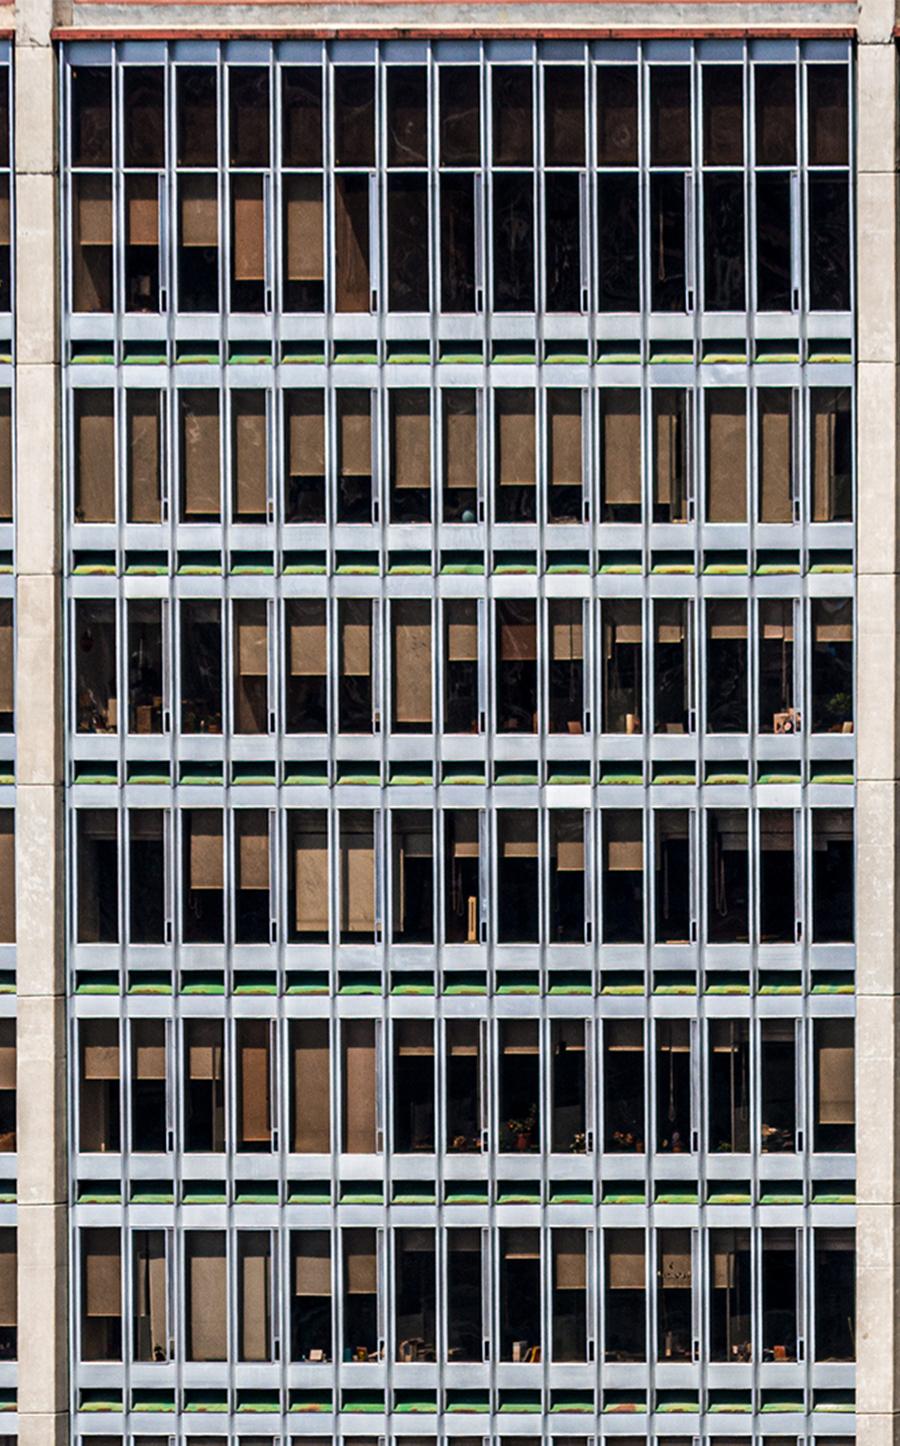 1002 Windows. Abstract architectural  landscape color photograph  - Contemporary Photograph by Javier Rey